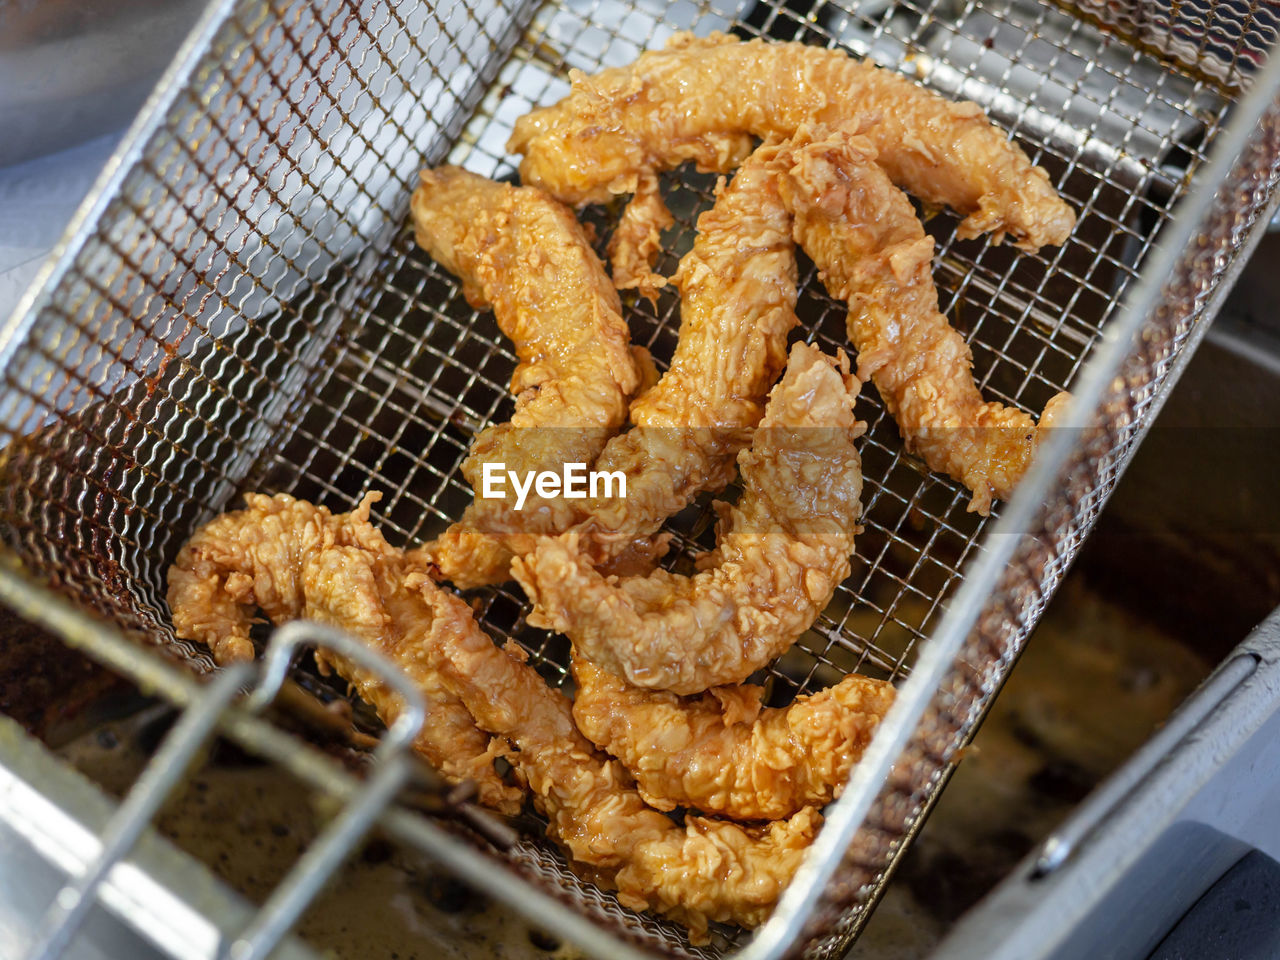 The boiling oil frying of the nuggets is complete. large chunks of deep-fried chicken 